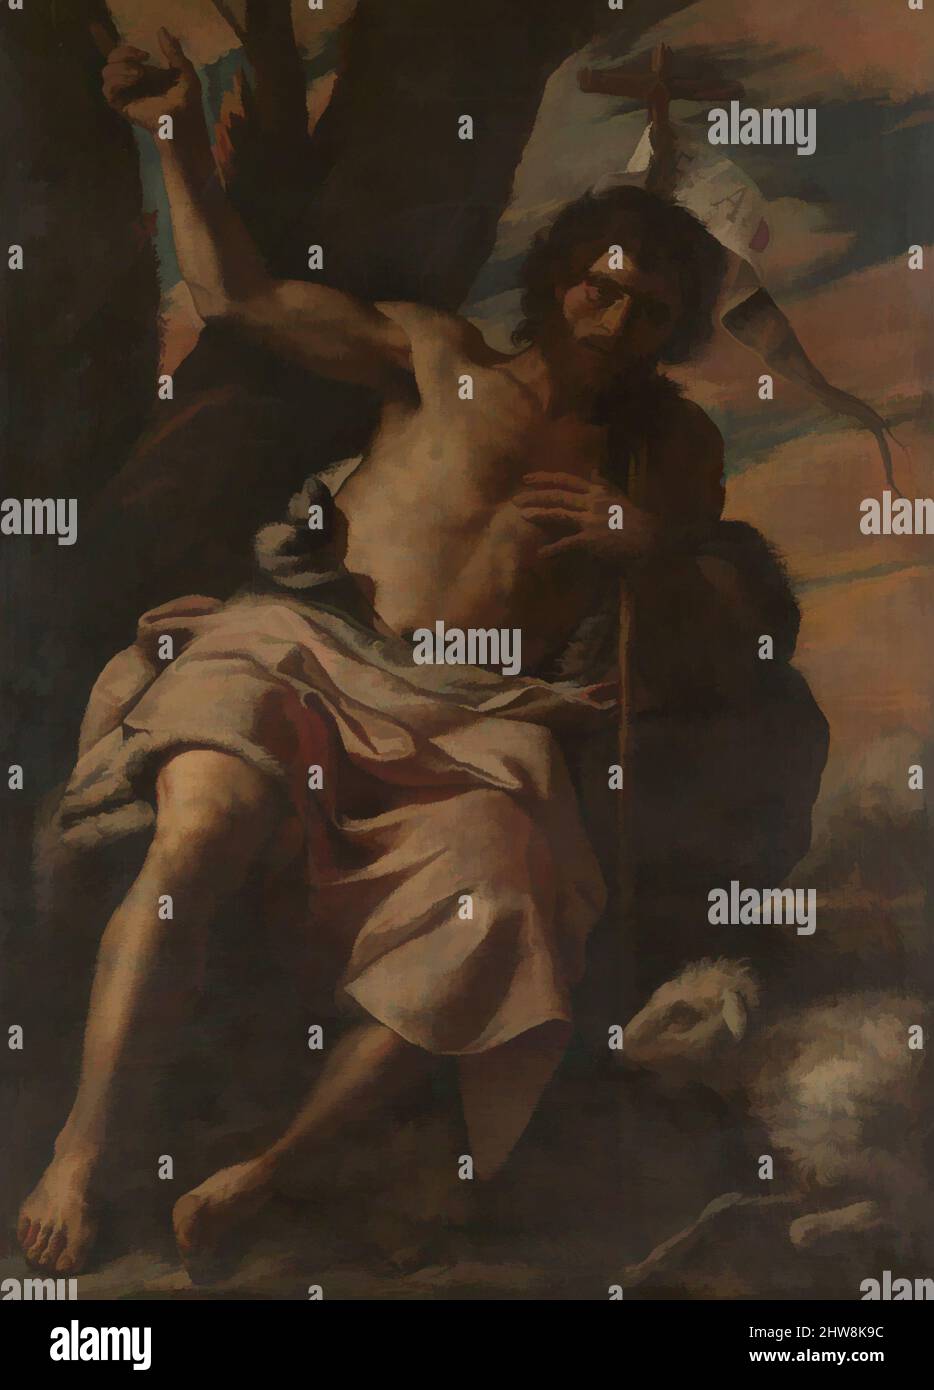 Art inspired by Saint John the Baptist Preaching, ca. 1650, Oil on canvas, 68 x 47 3/4 in. (172.7 x 121.3 cm), Paintings, Mattia Preti (Il Cavalier Calabrese) (Italian, Taverna 1613–1699 Valletta), Saint John the Baptist is shown seated in the wilderness exhorting the viewer to, Classic works modernized by Artotop with a splash of modernity. Shapes, color and value, eye-catching visual impact on art. Emotions through freedom of artworks in a contemporary way. A timeless message pursuing a wildly creative new direction. Artists turning to the digital medium and creating the Artotop NFT Stock Photo